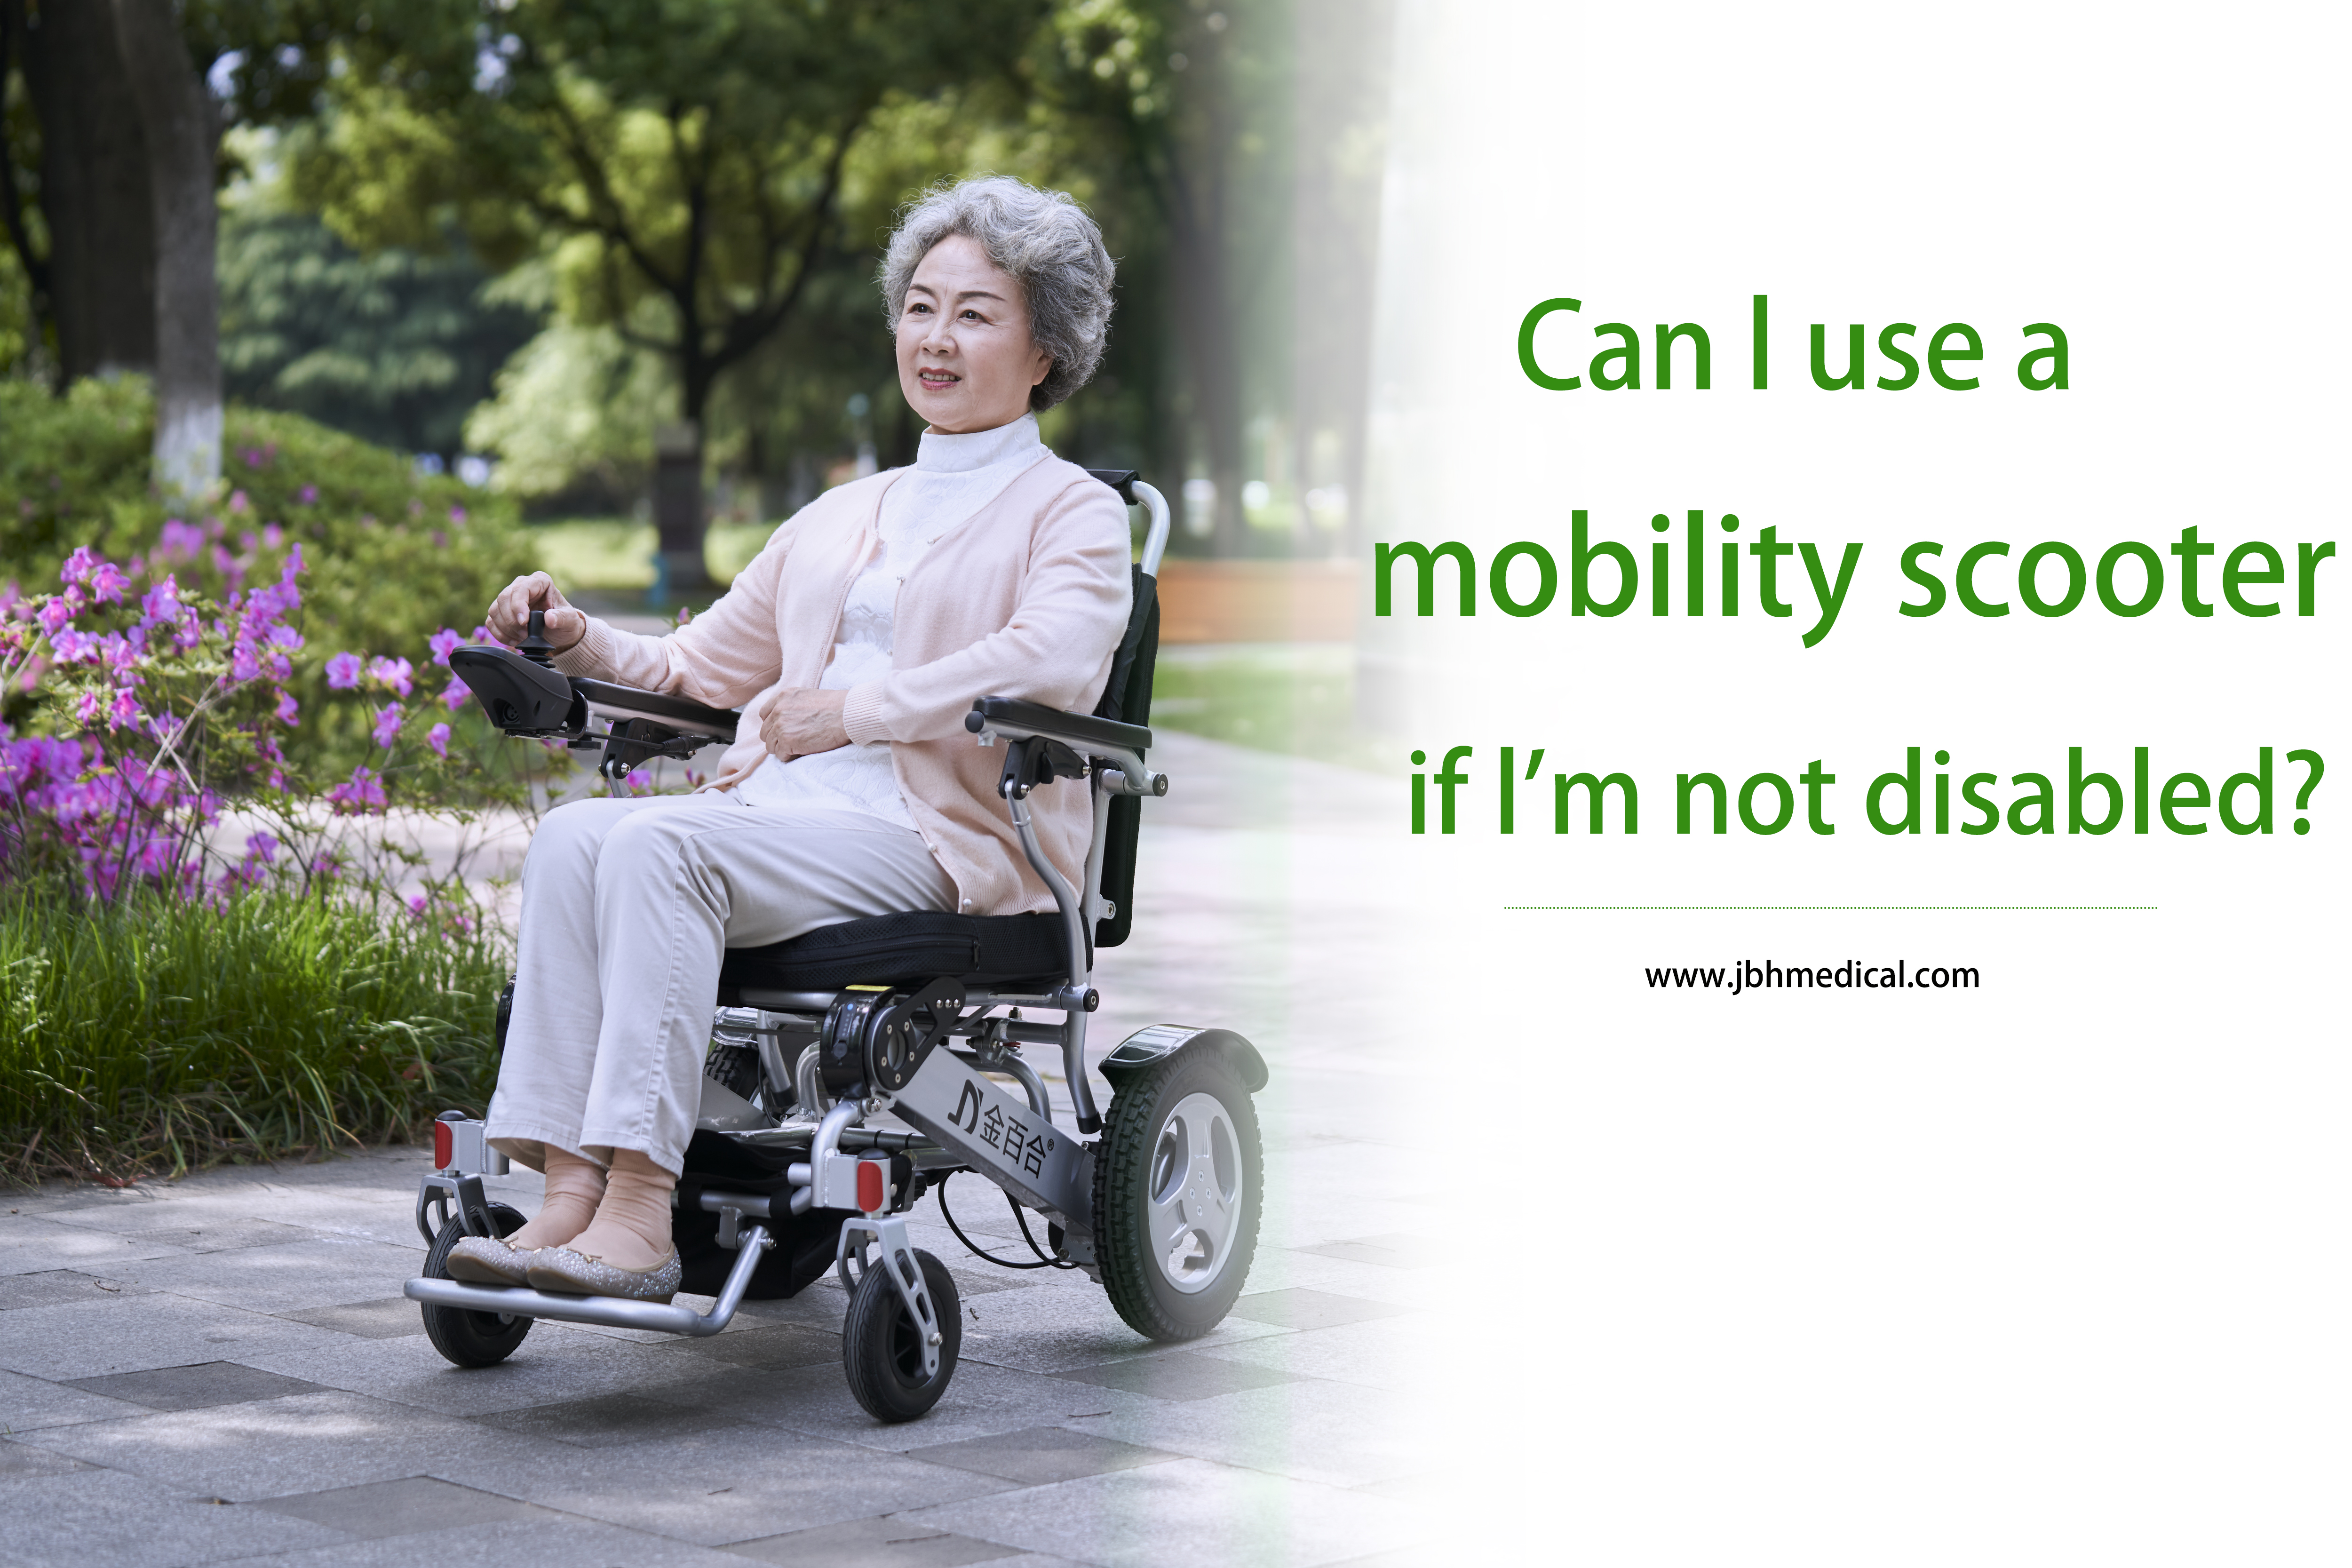 Can L Use A Mobility Scooter If L'm Not Disabled?